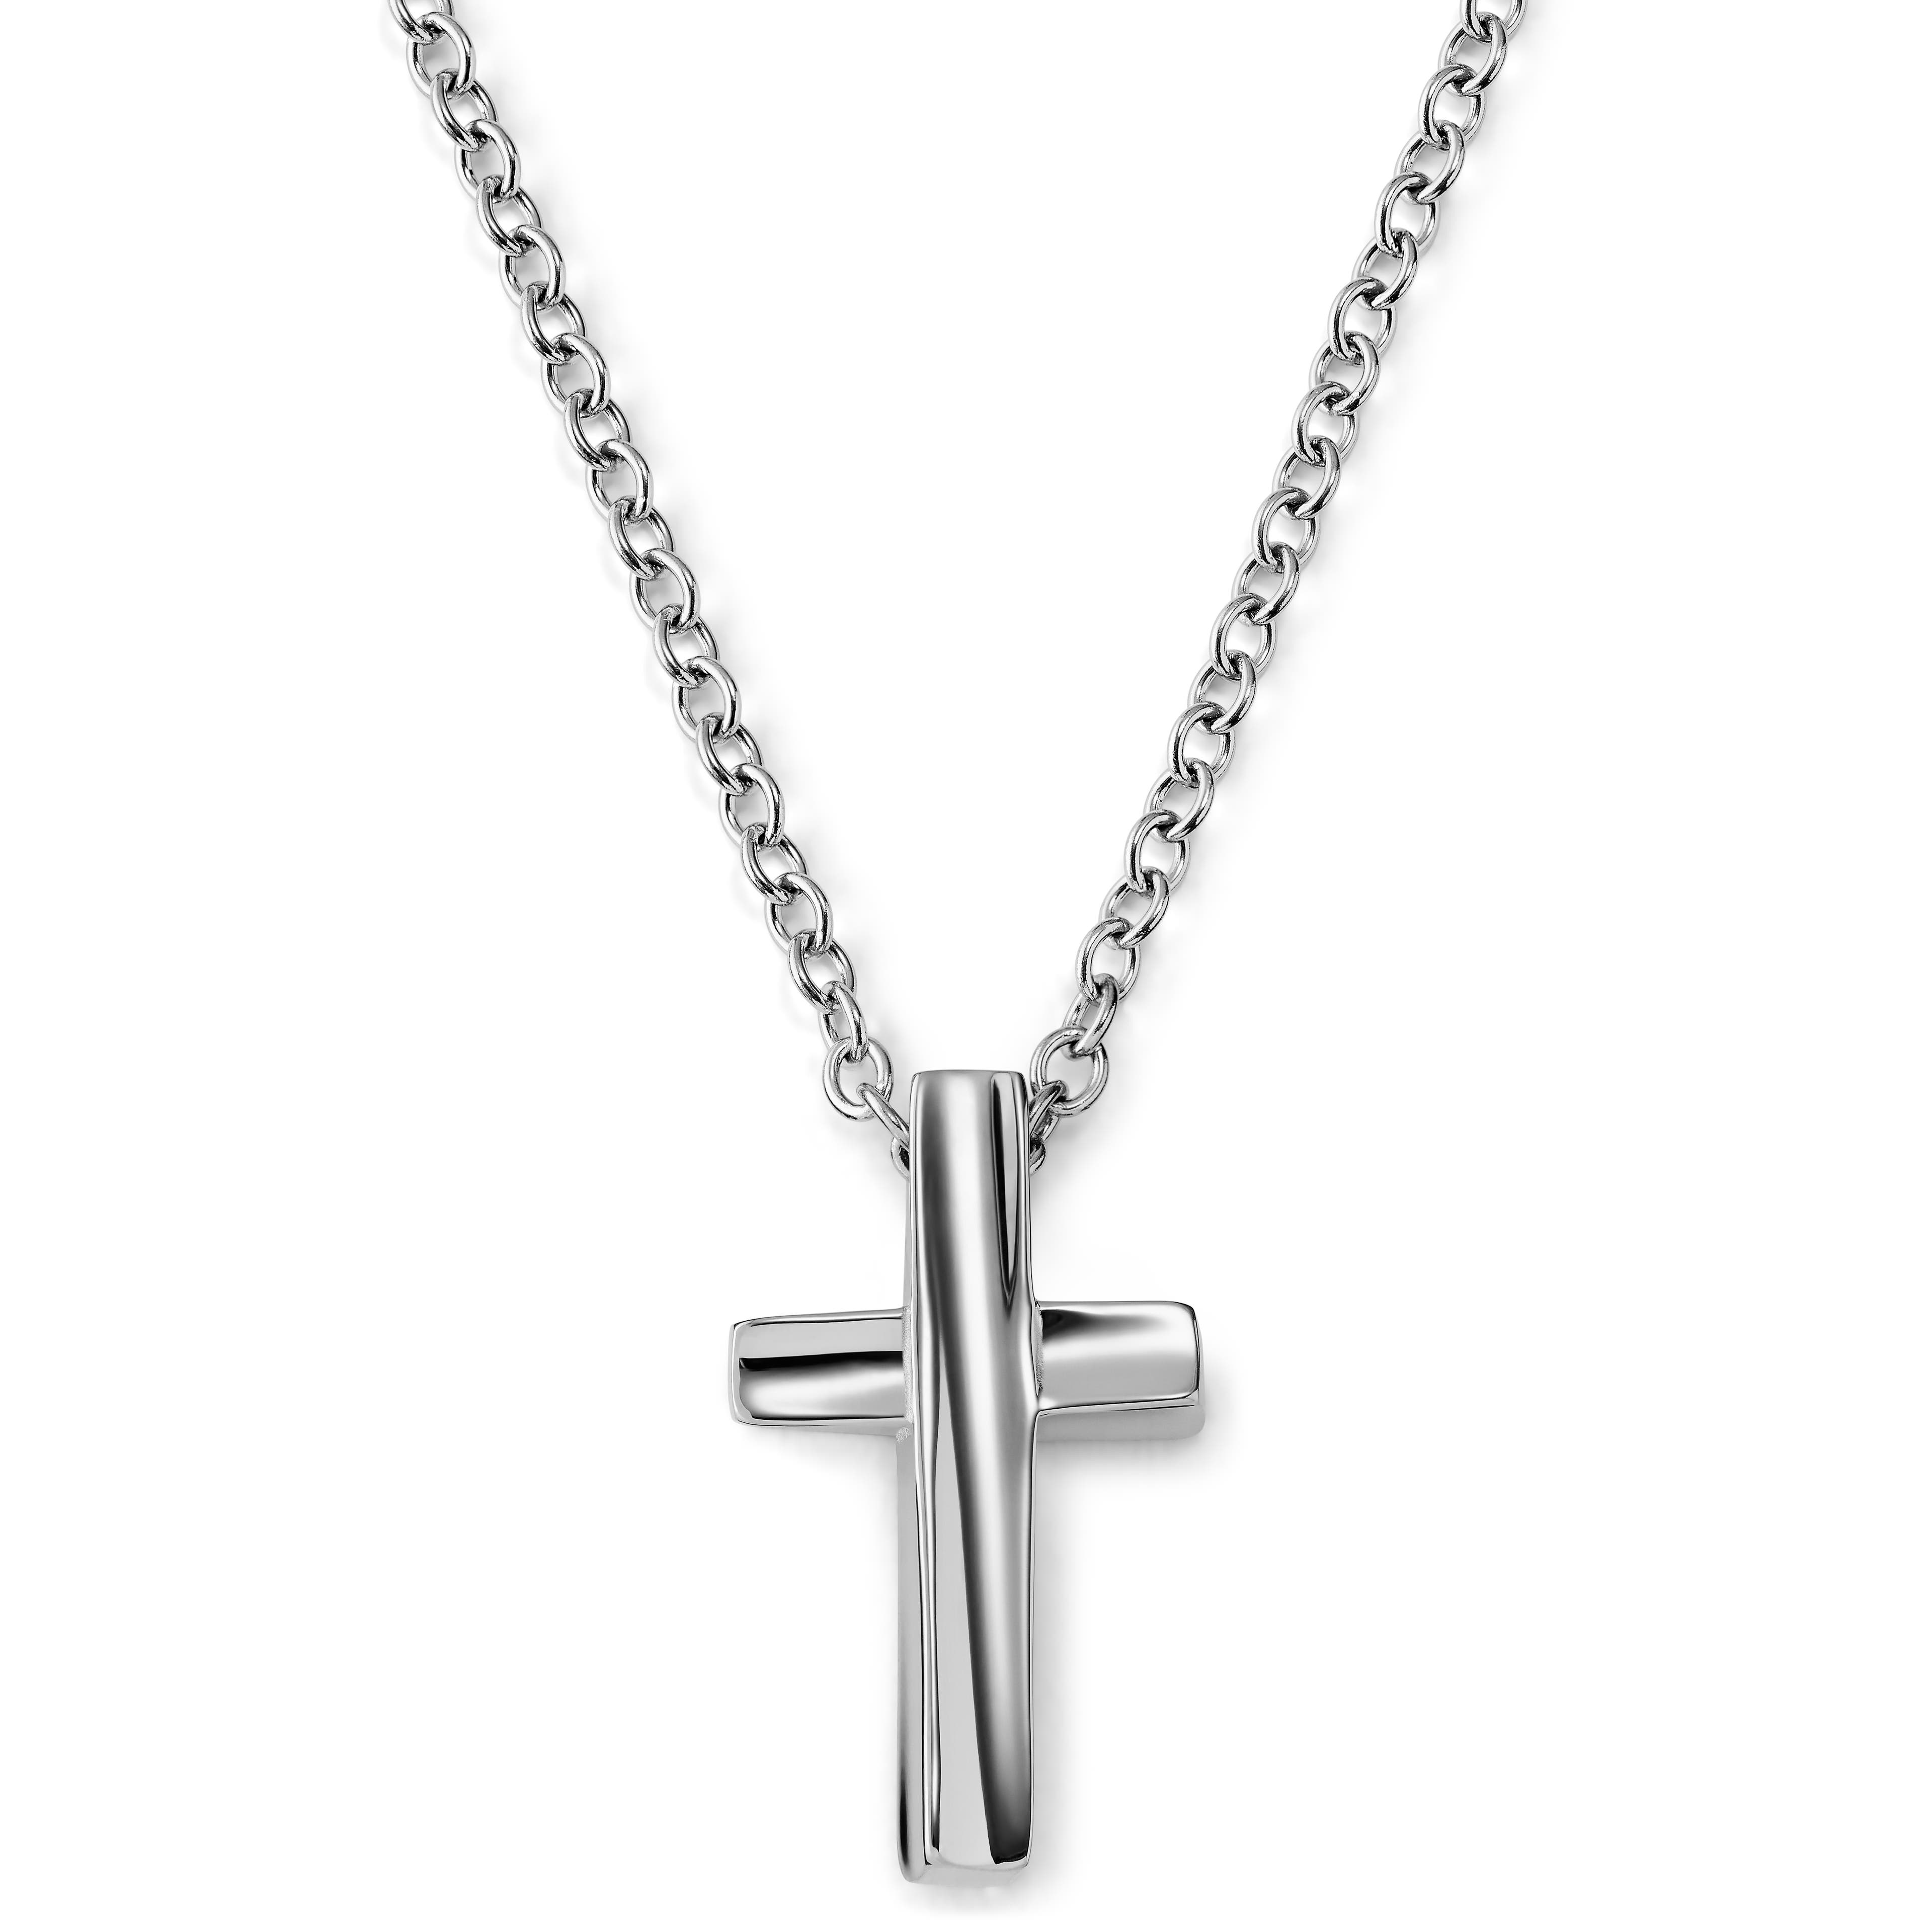 Silver-Tone Stainless Steel Curvy Cross Cable Chain Necklace